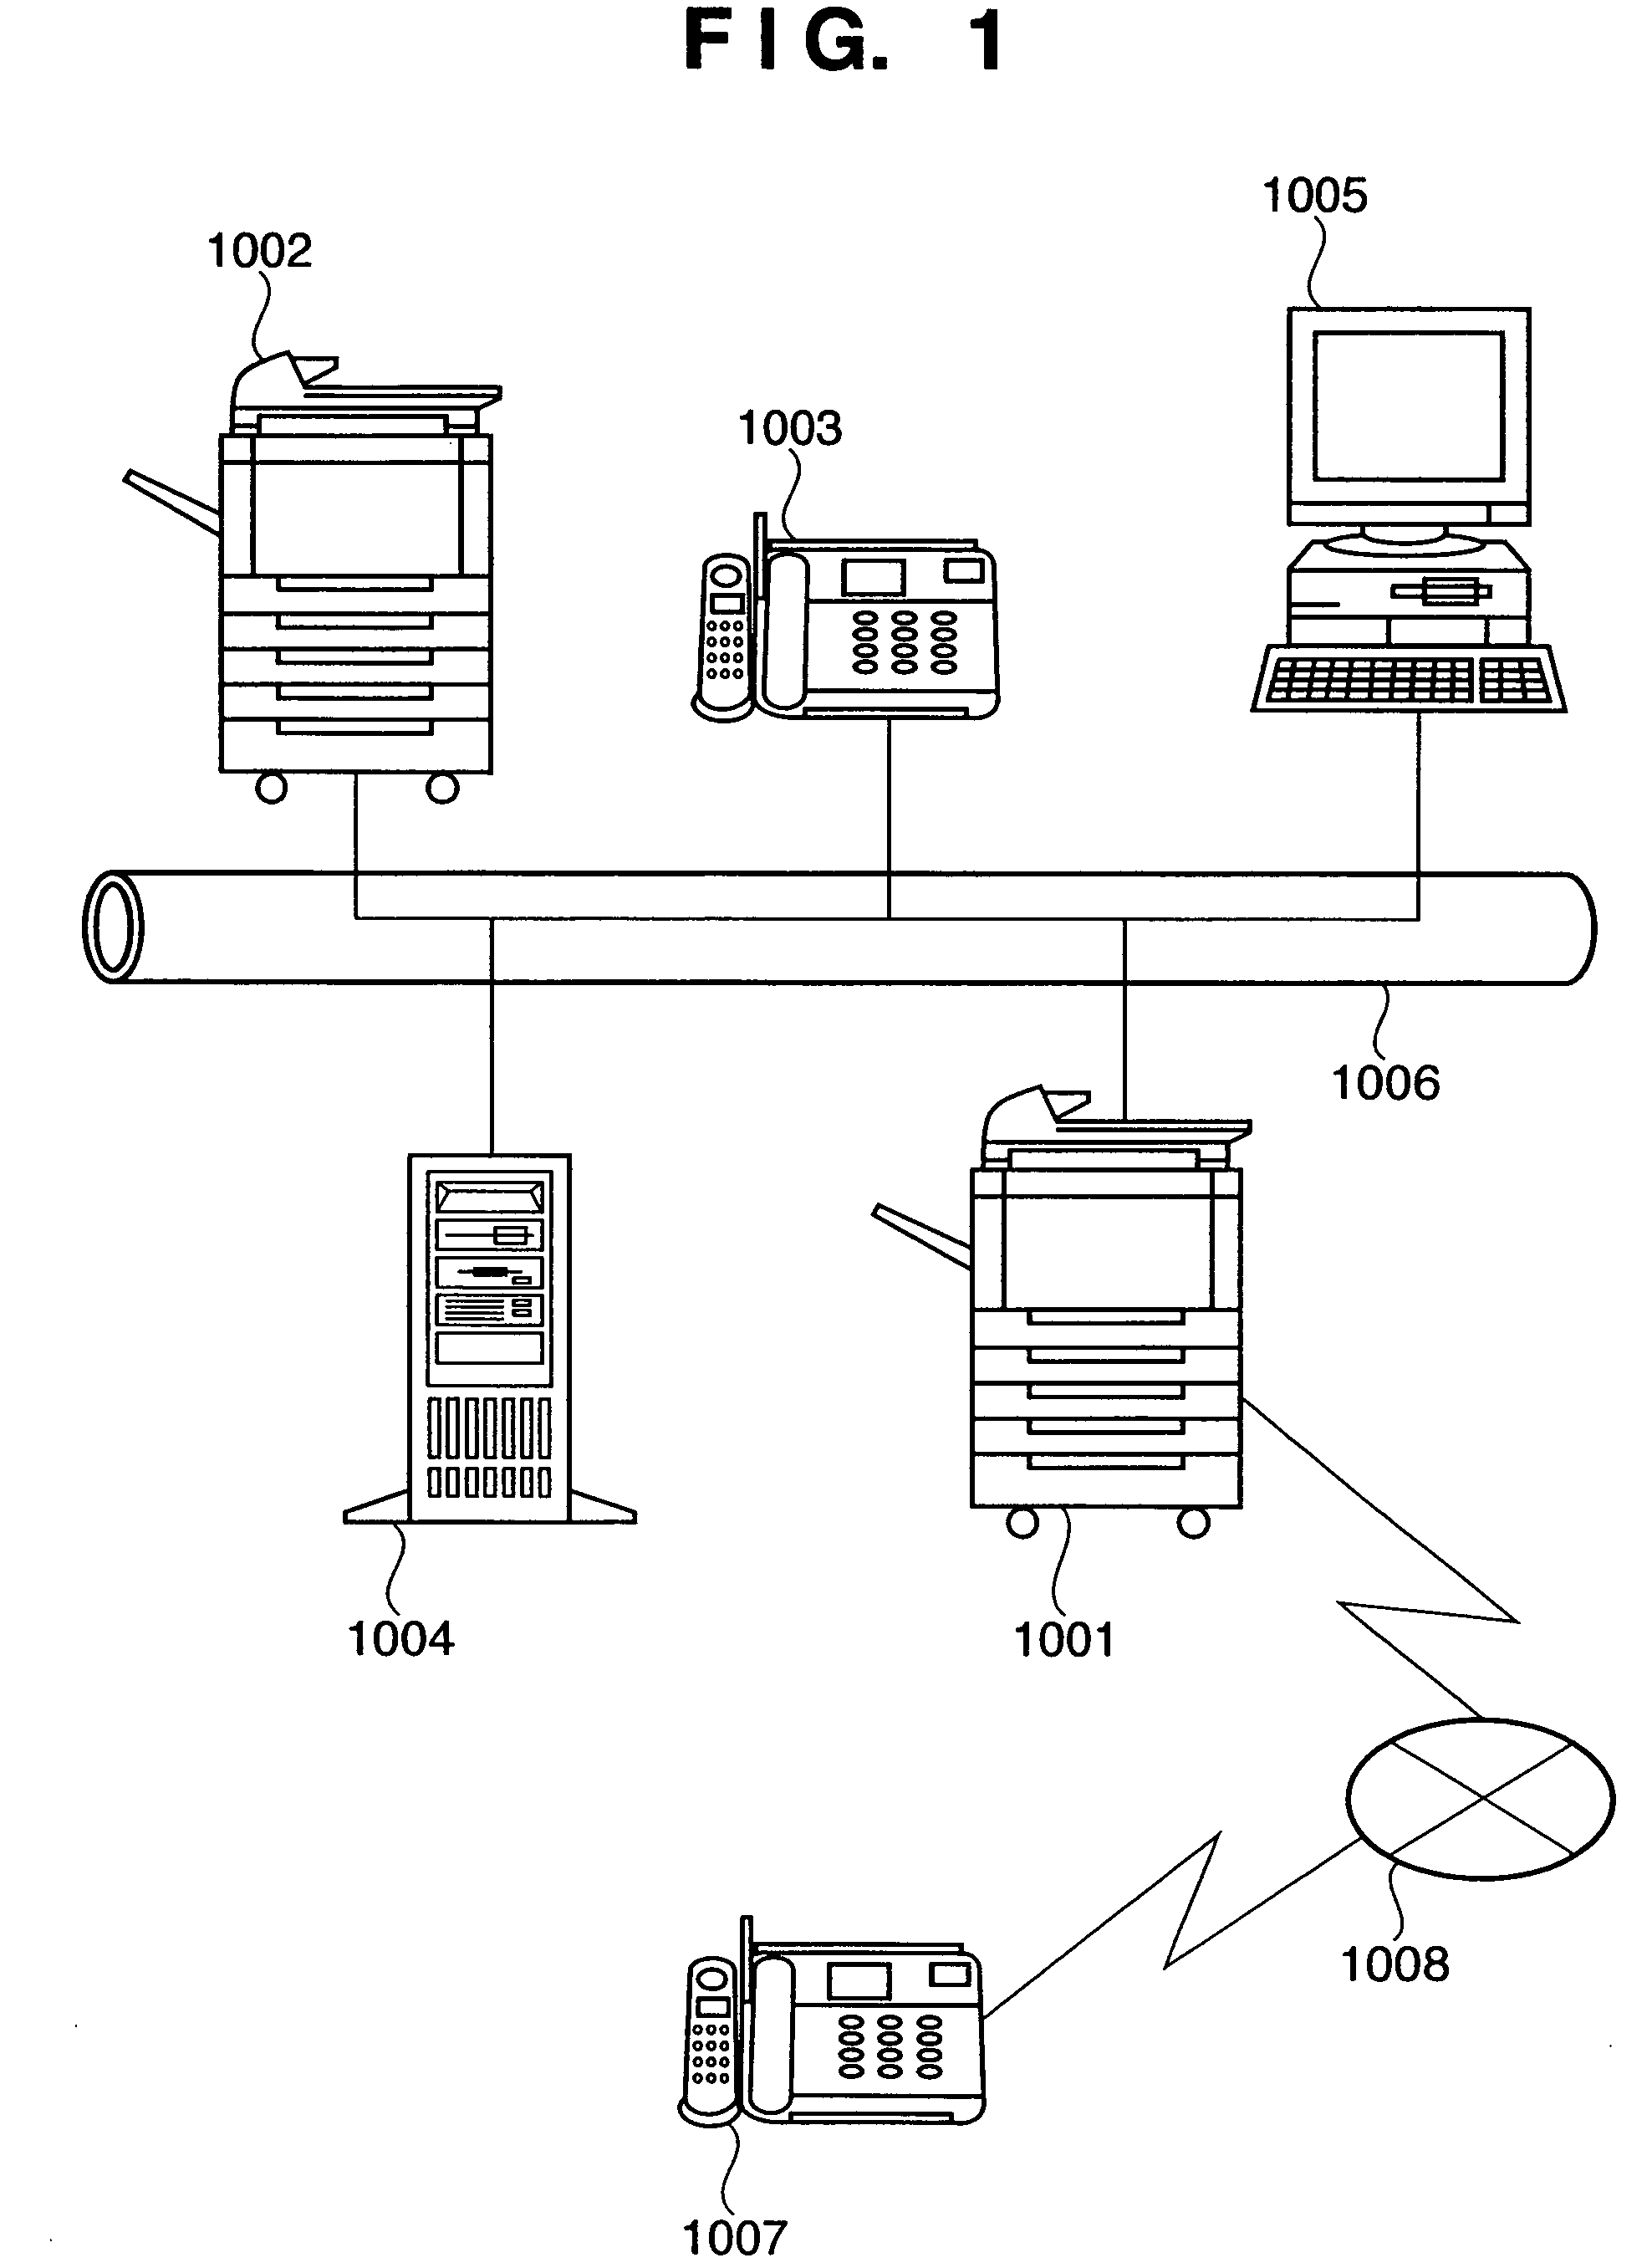 Method and apparatus for automated download and printing of Web pages